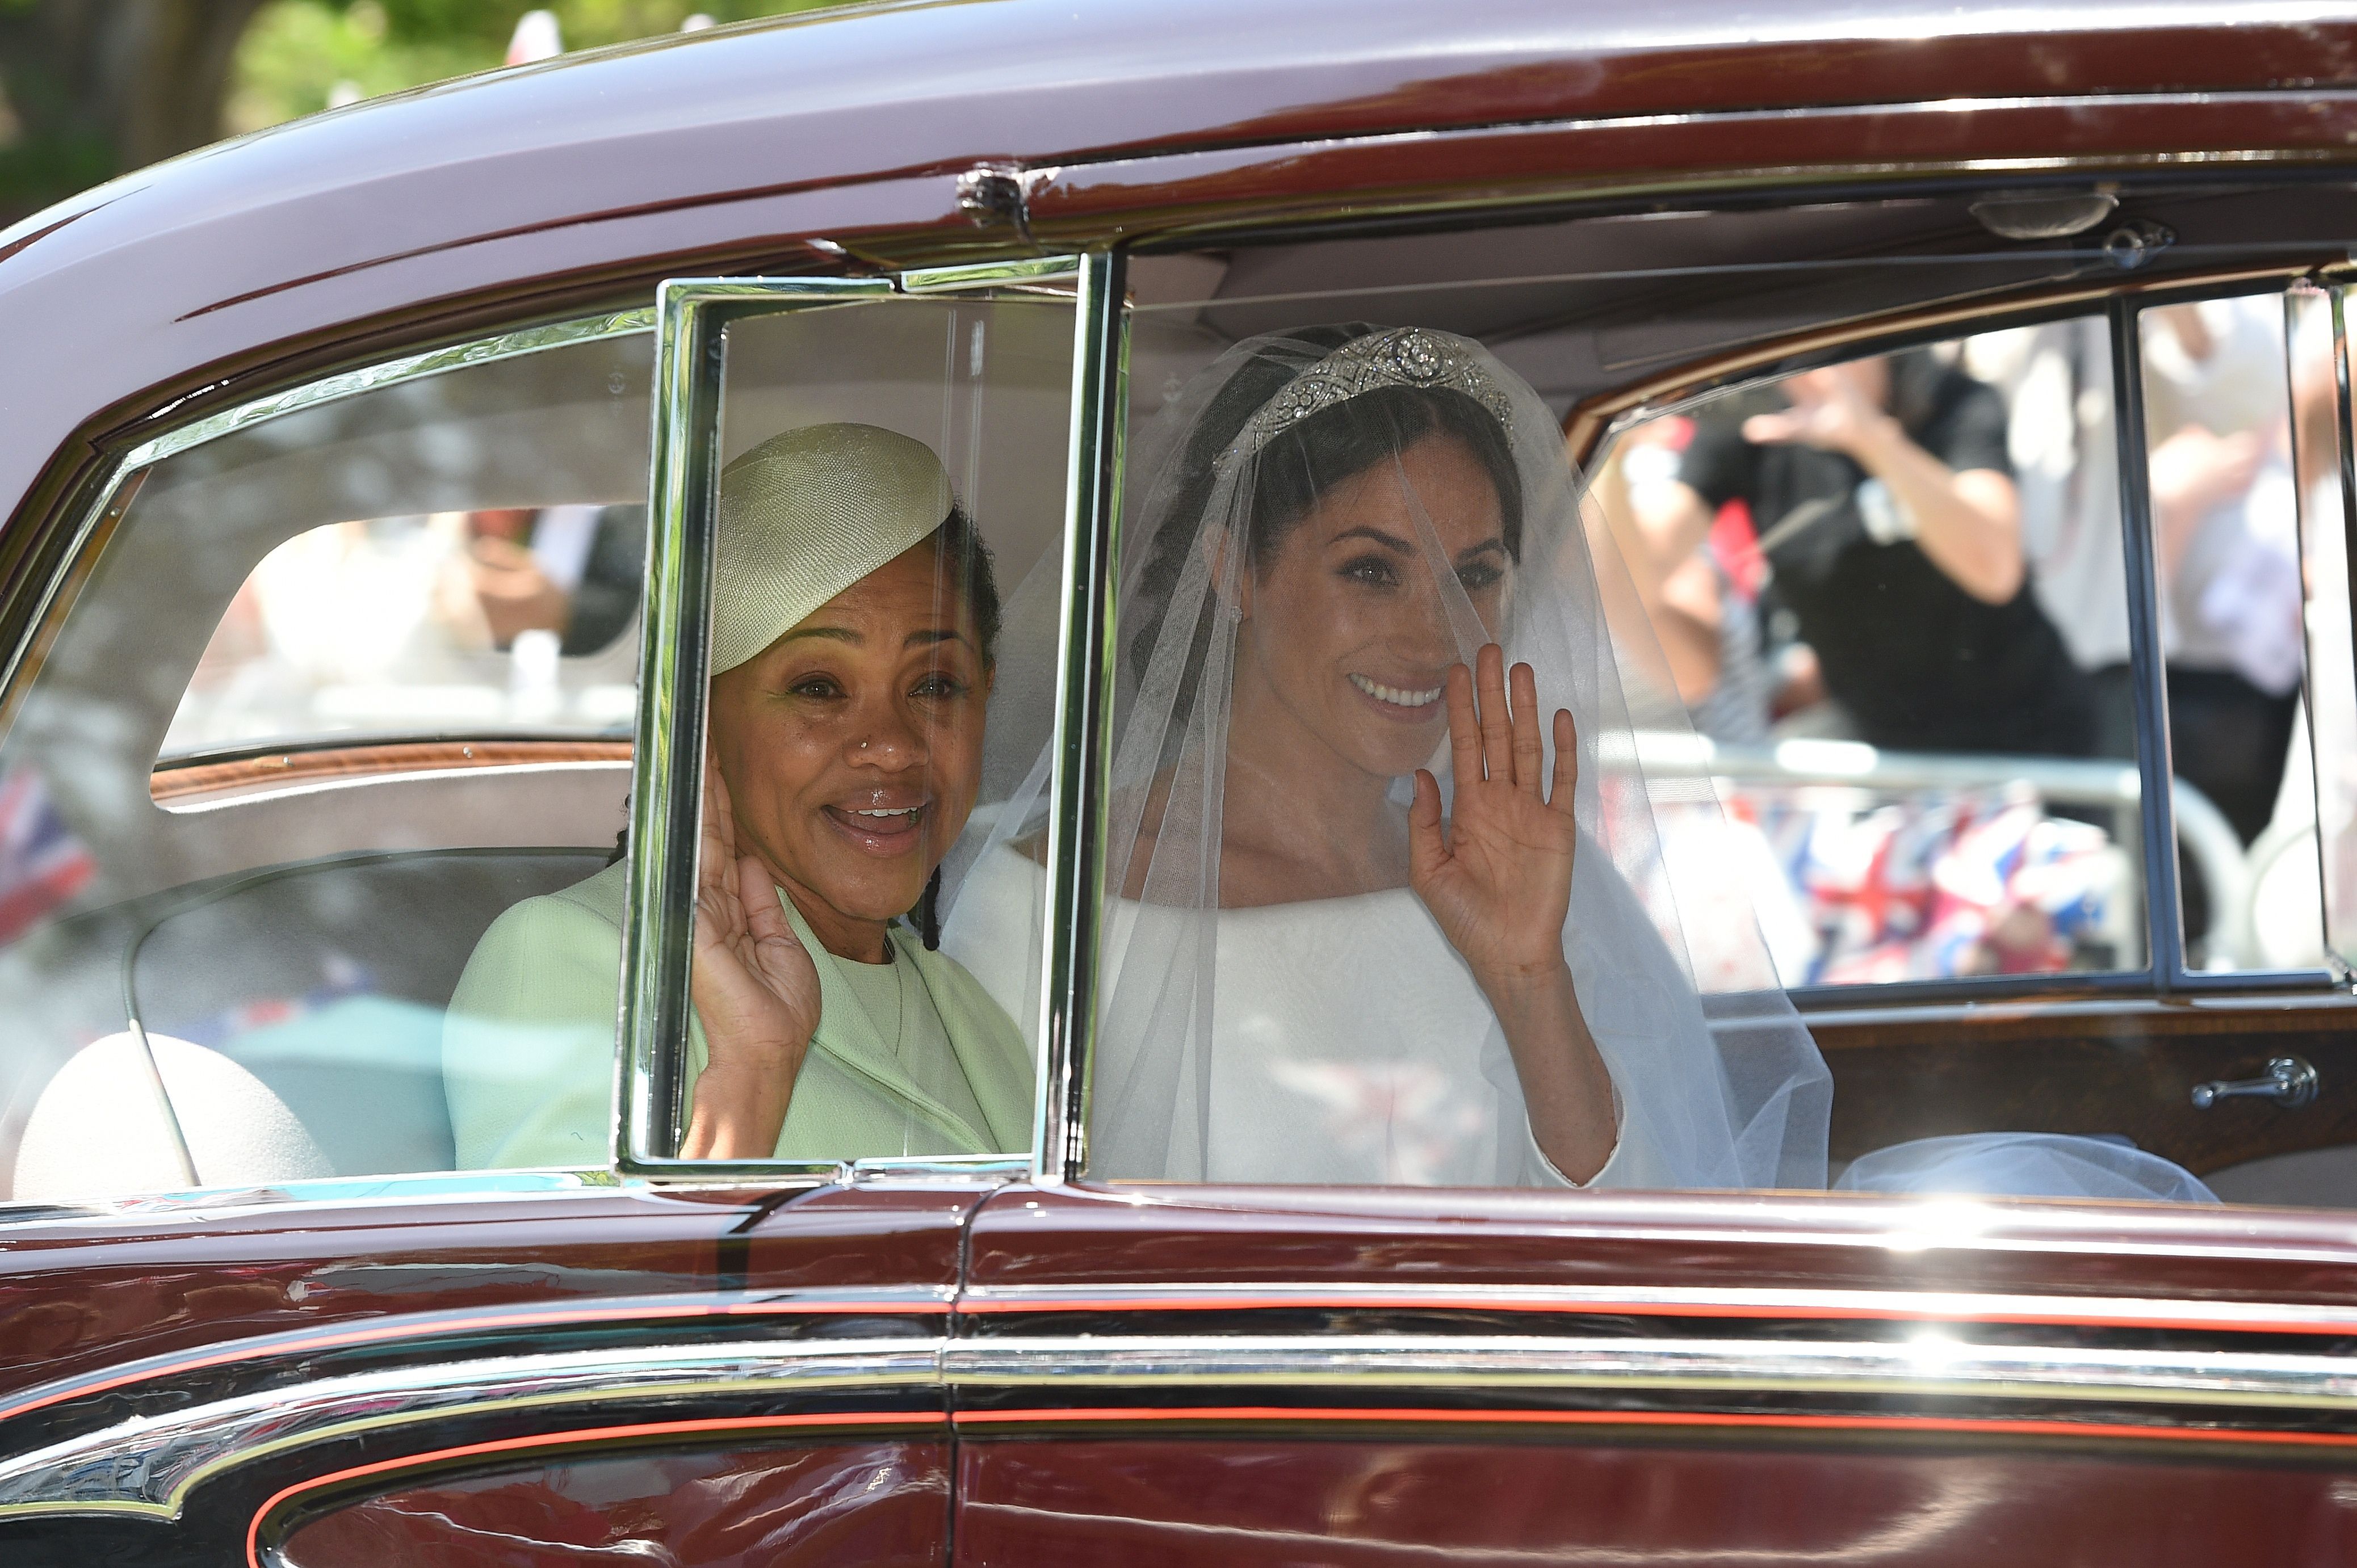 Chatting the Pictures: Royal Wedding; Santa Fe Massacre; Trump Summit Coin